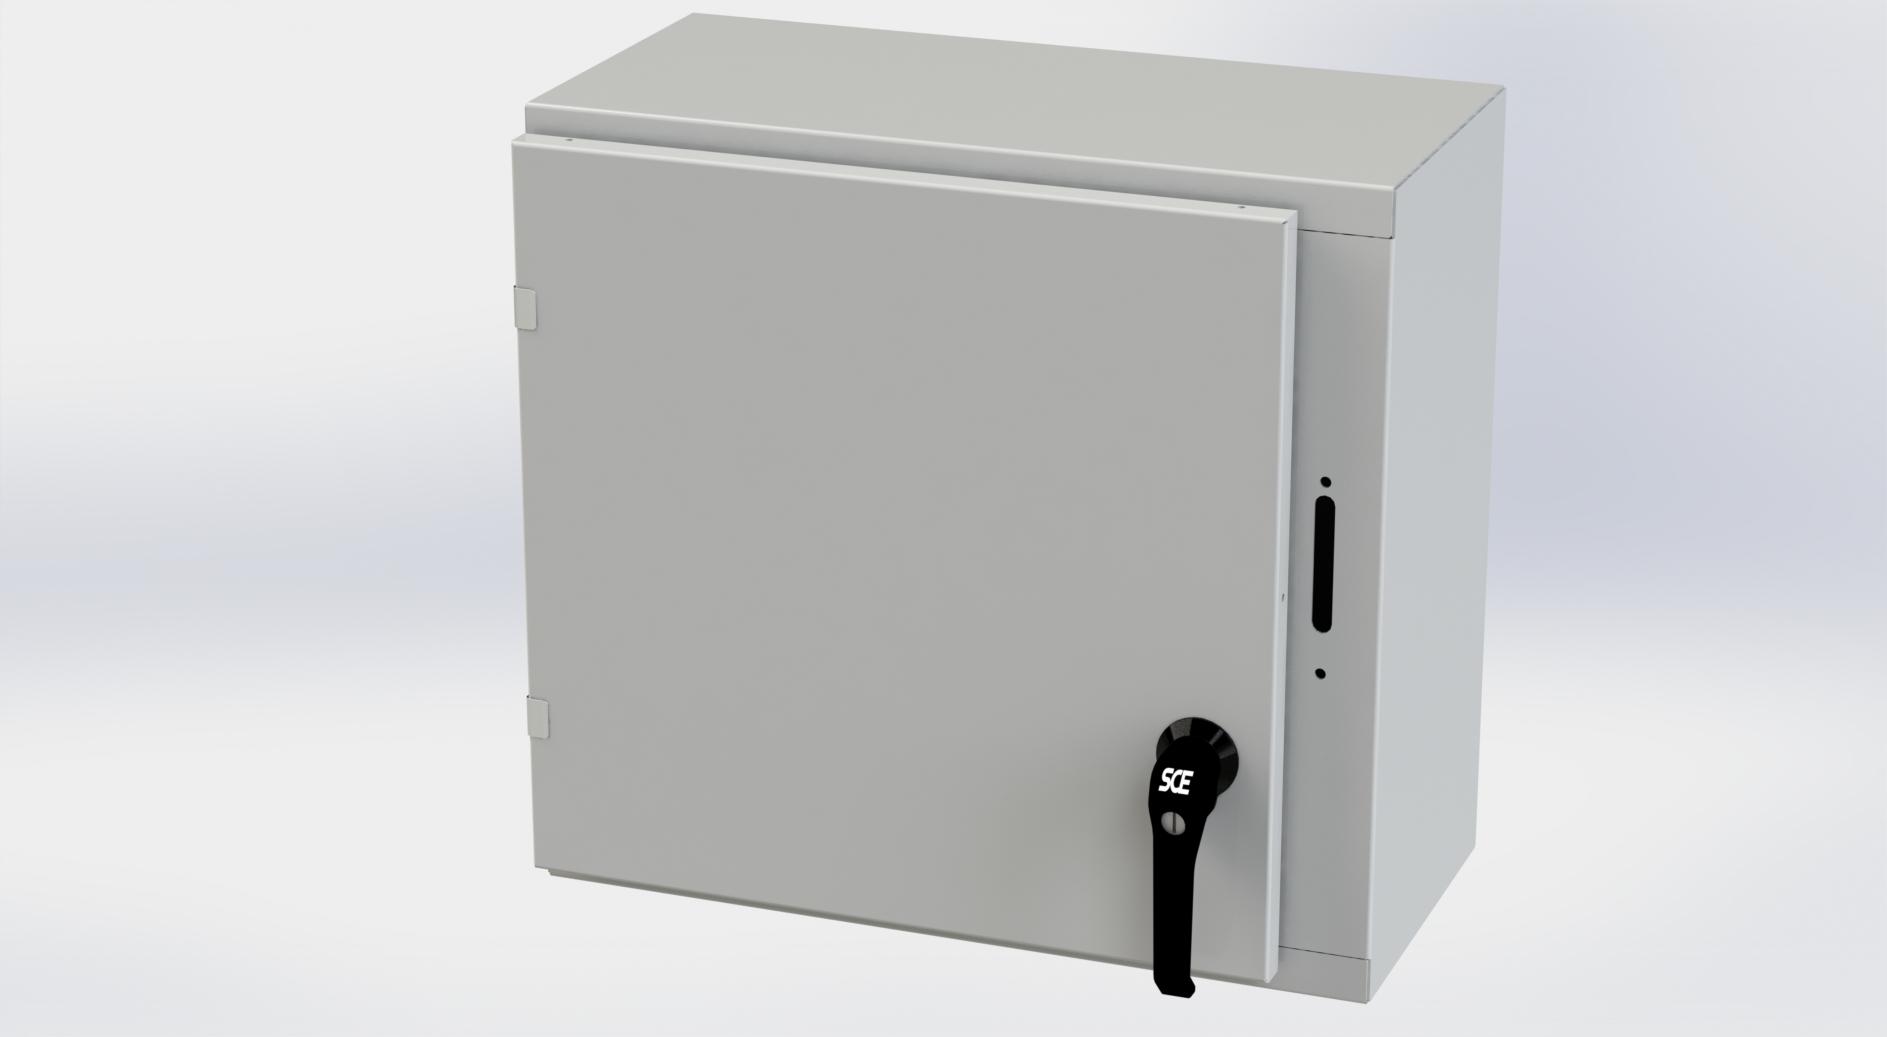 Saginaw Control SCE-20XEL2110LPLG XEL LP Enclosure, Height:20.00", Width:21.38", Depth:10.00", RAL 7035 gray powder coating inside and out. Optional sub-panels are powder coated white.